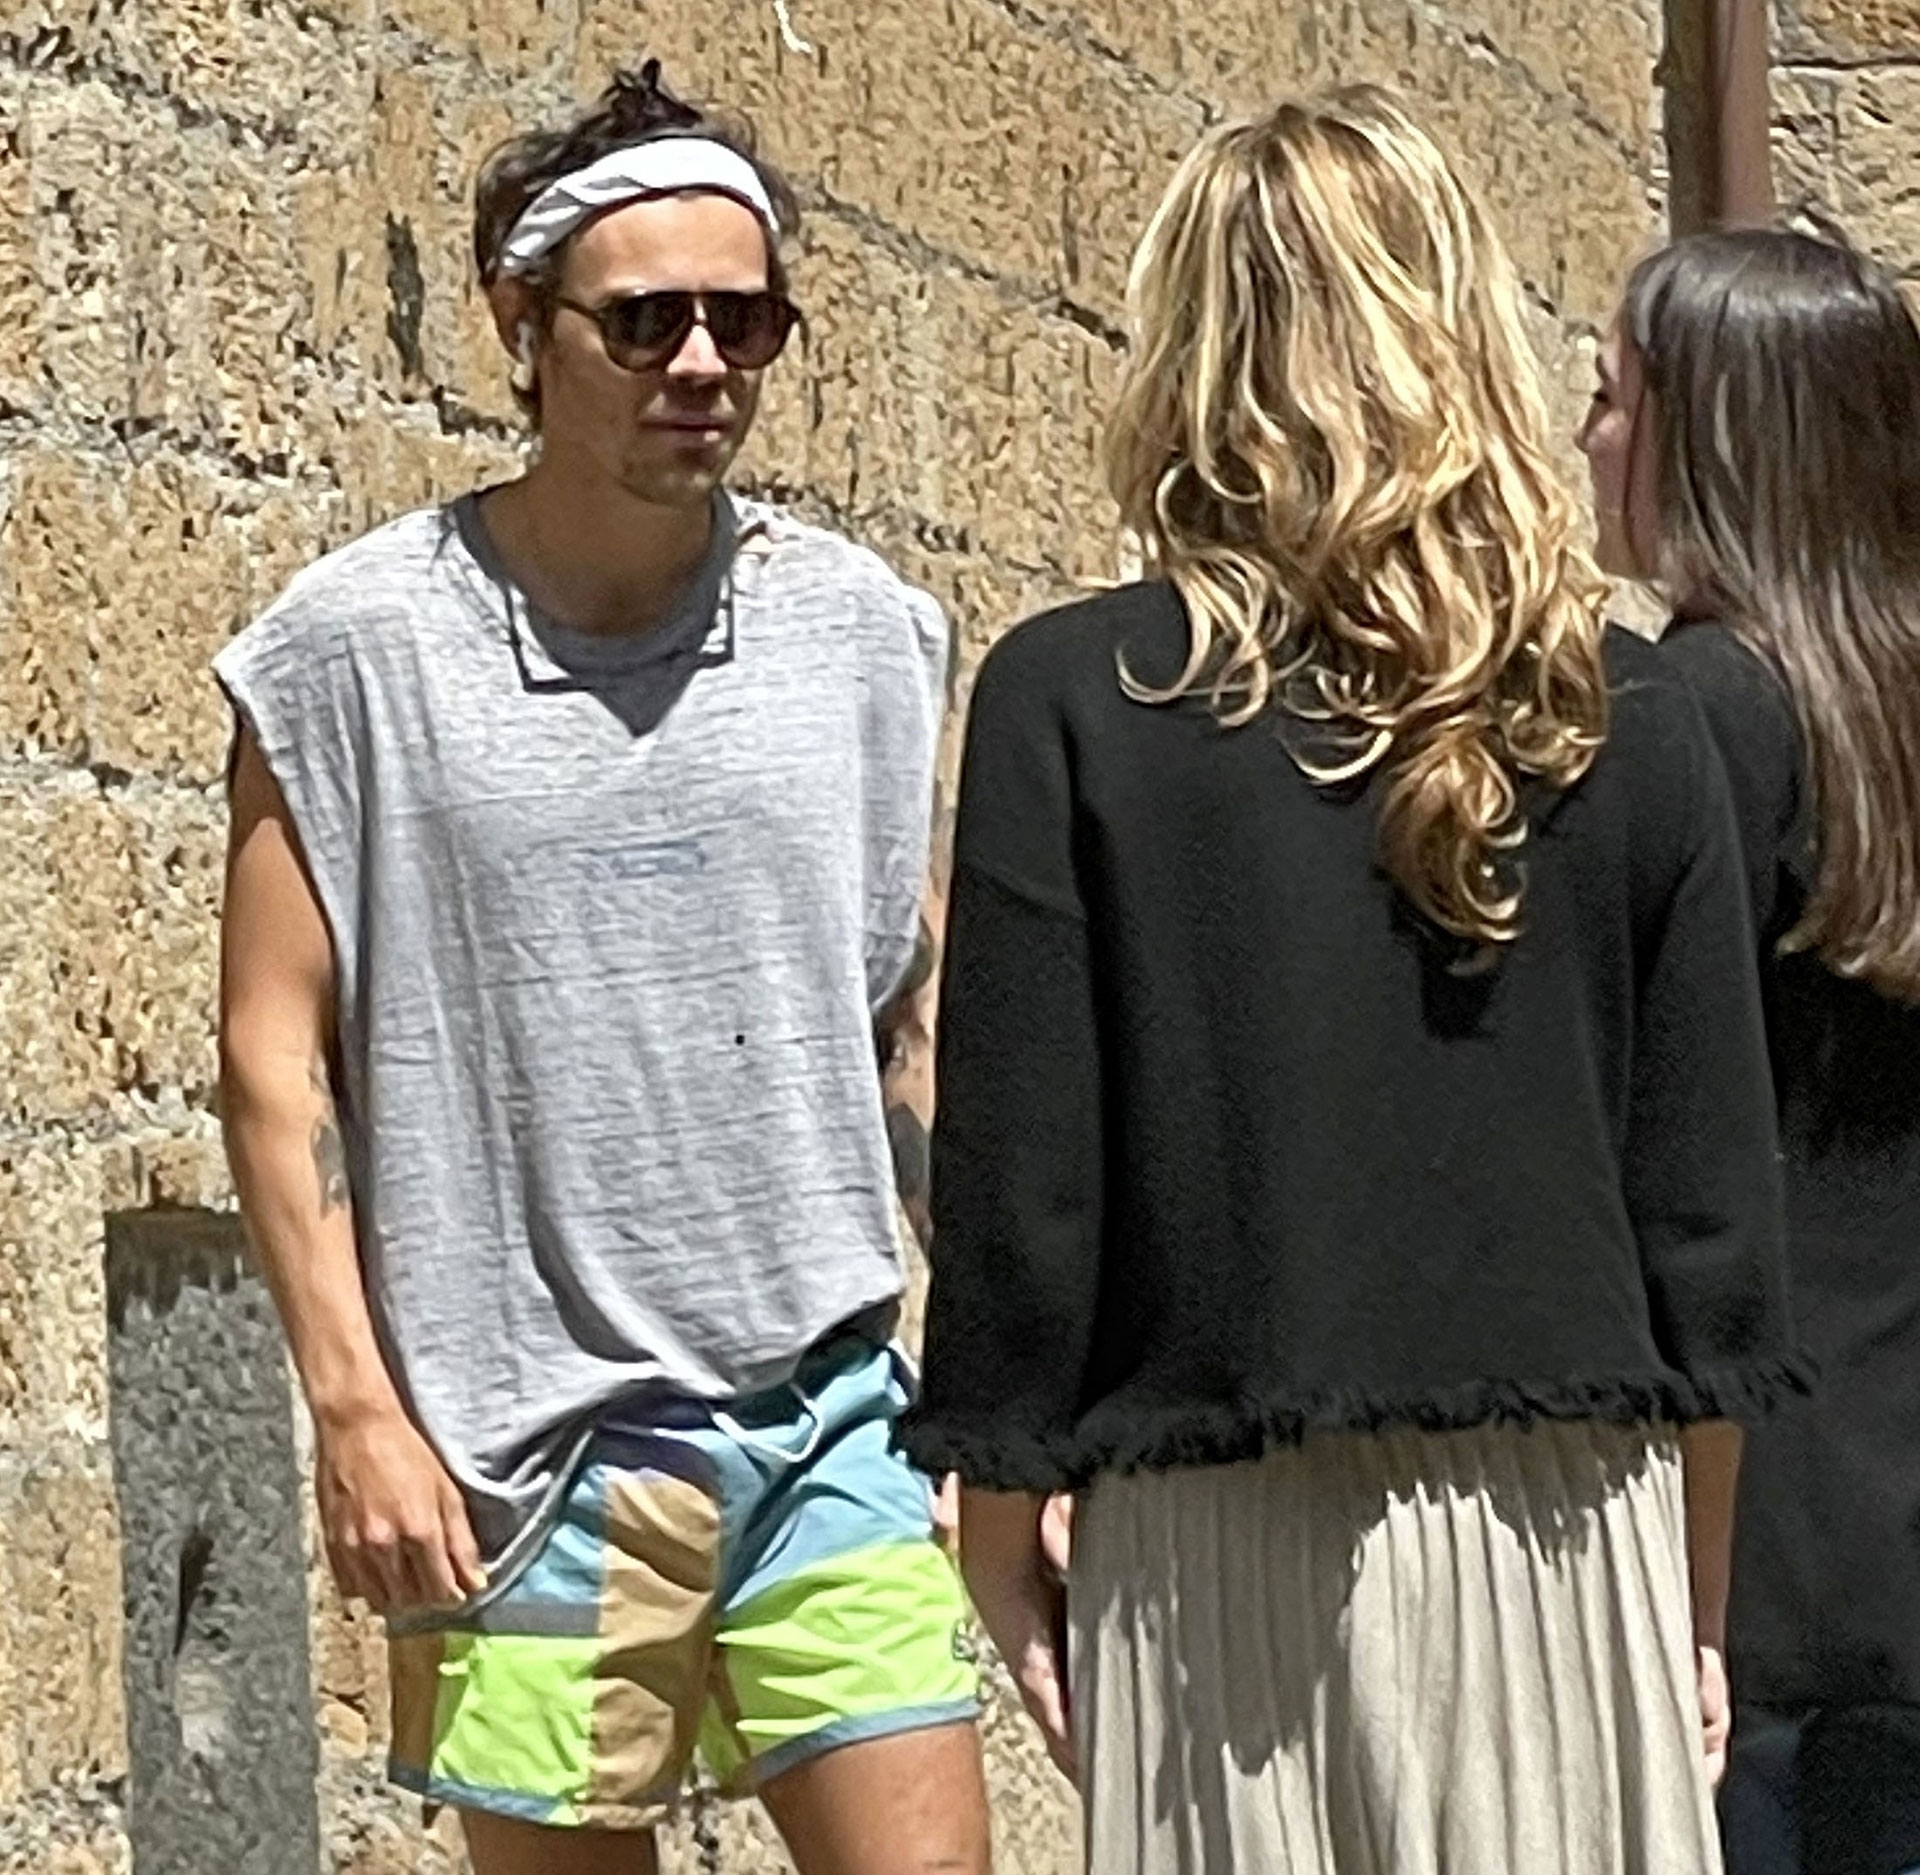 Harry Styles was out walking the streets of Italy, where he is vacationing with Olivia Wilde, and stopped to say hello to a group of fans who recognized him.  He was playing sports, wearing multicolored shorts, gray tank tops, a headband and sunglasses.